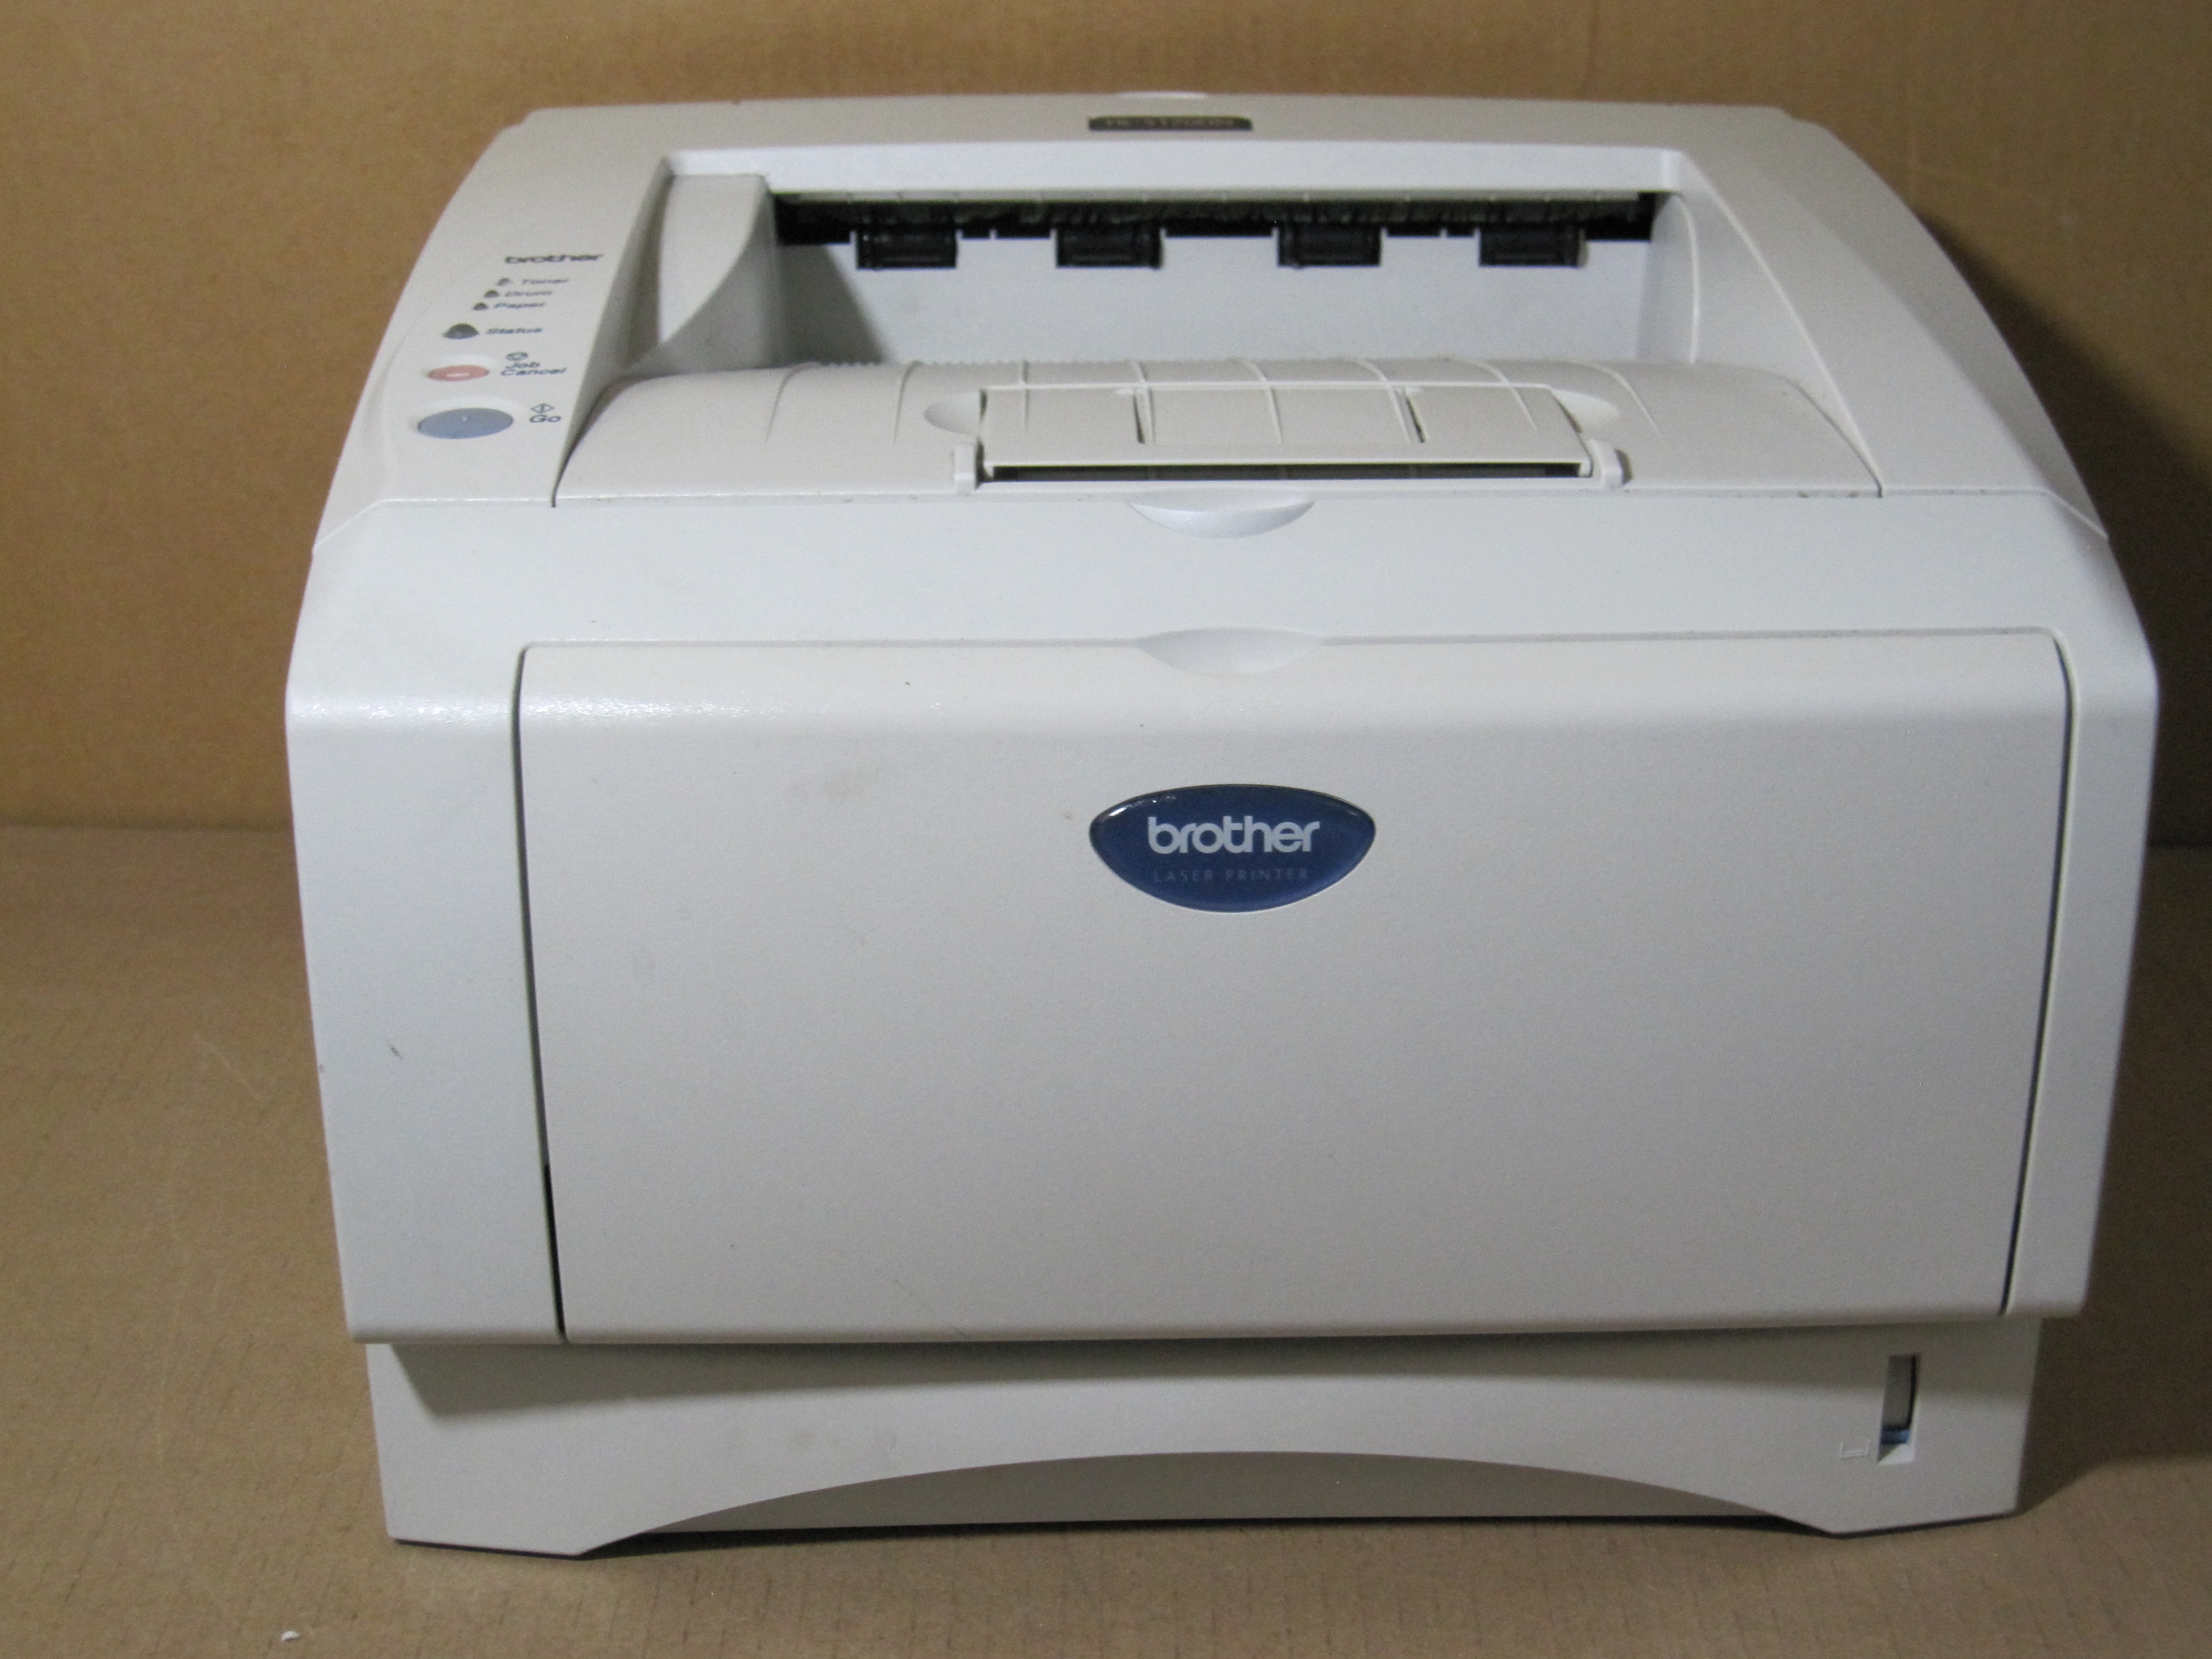 brother mfc-7420 printer driver for mac